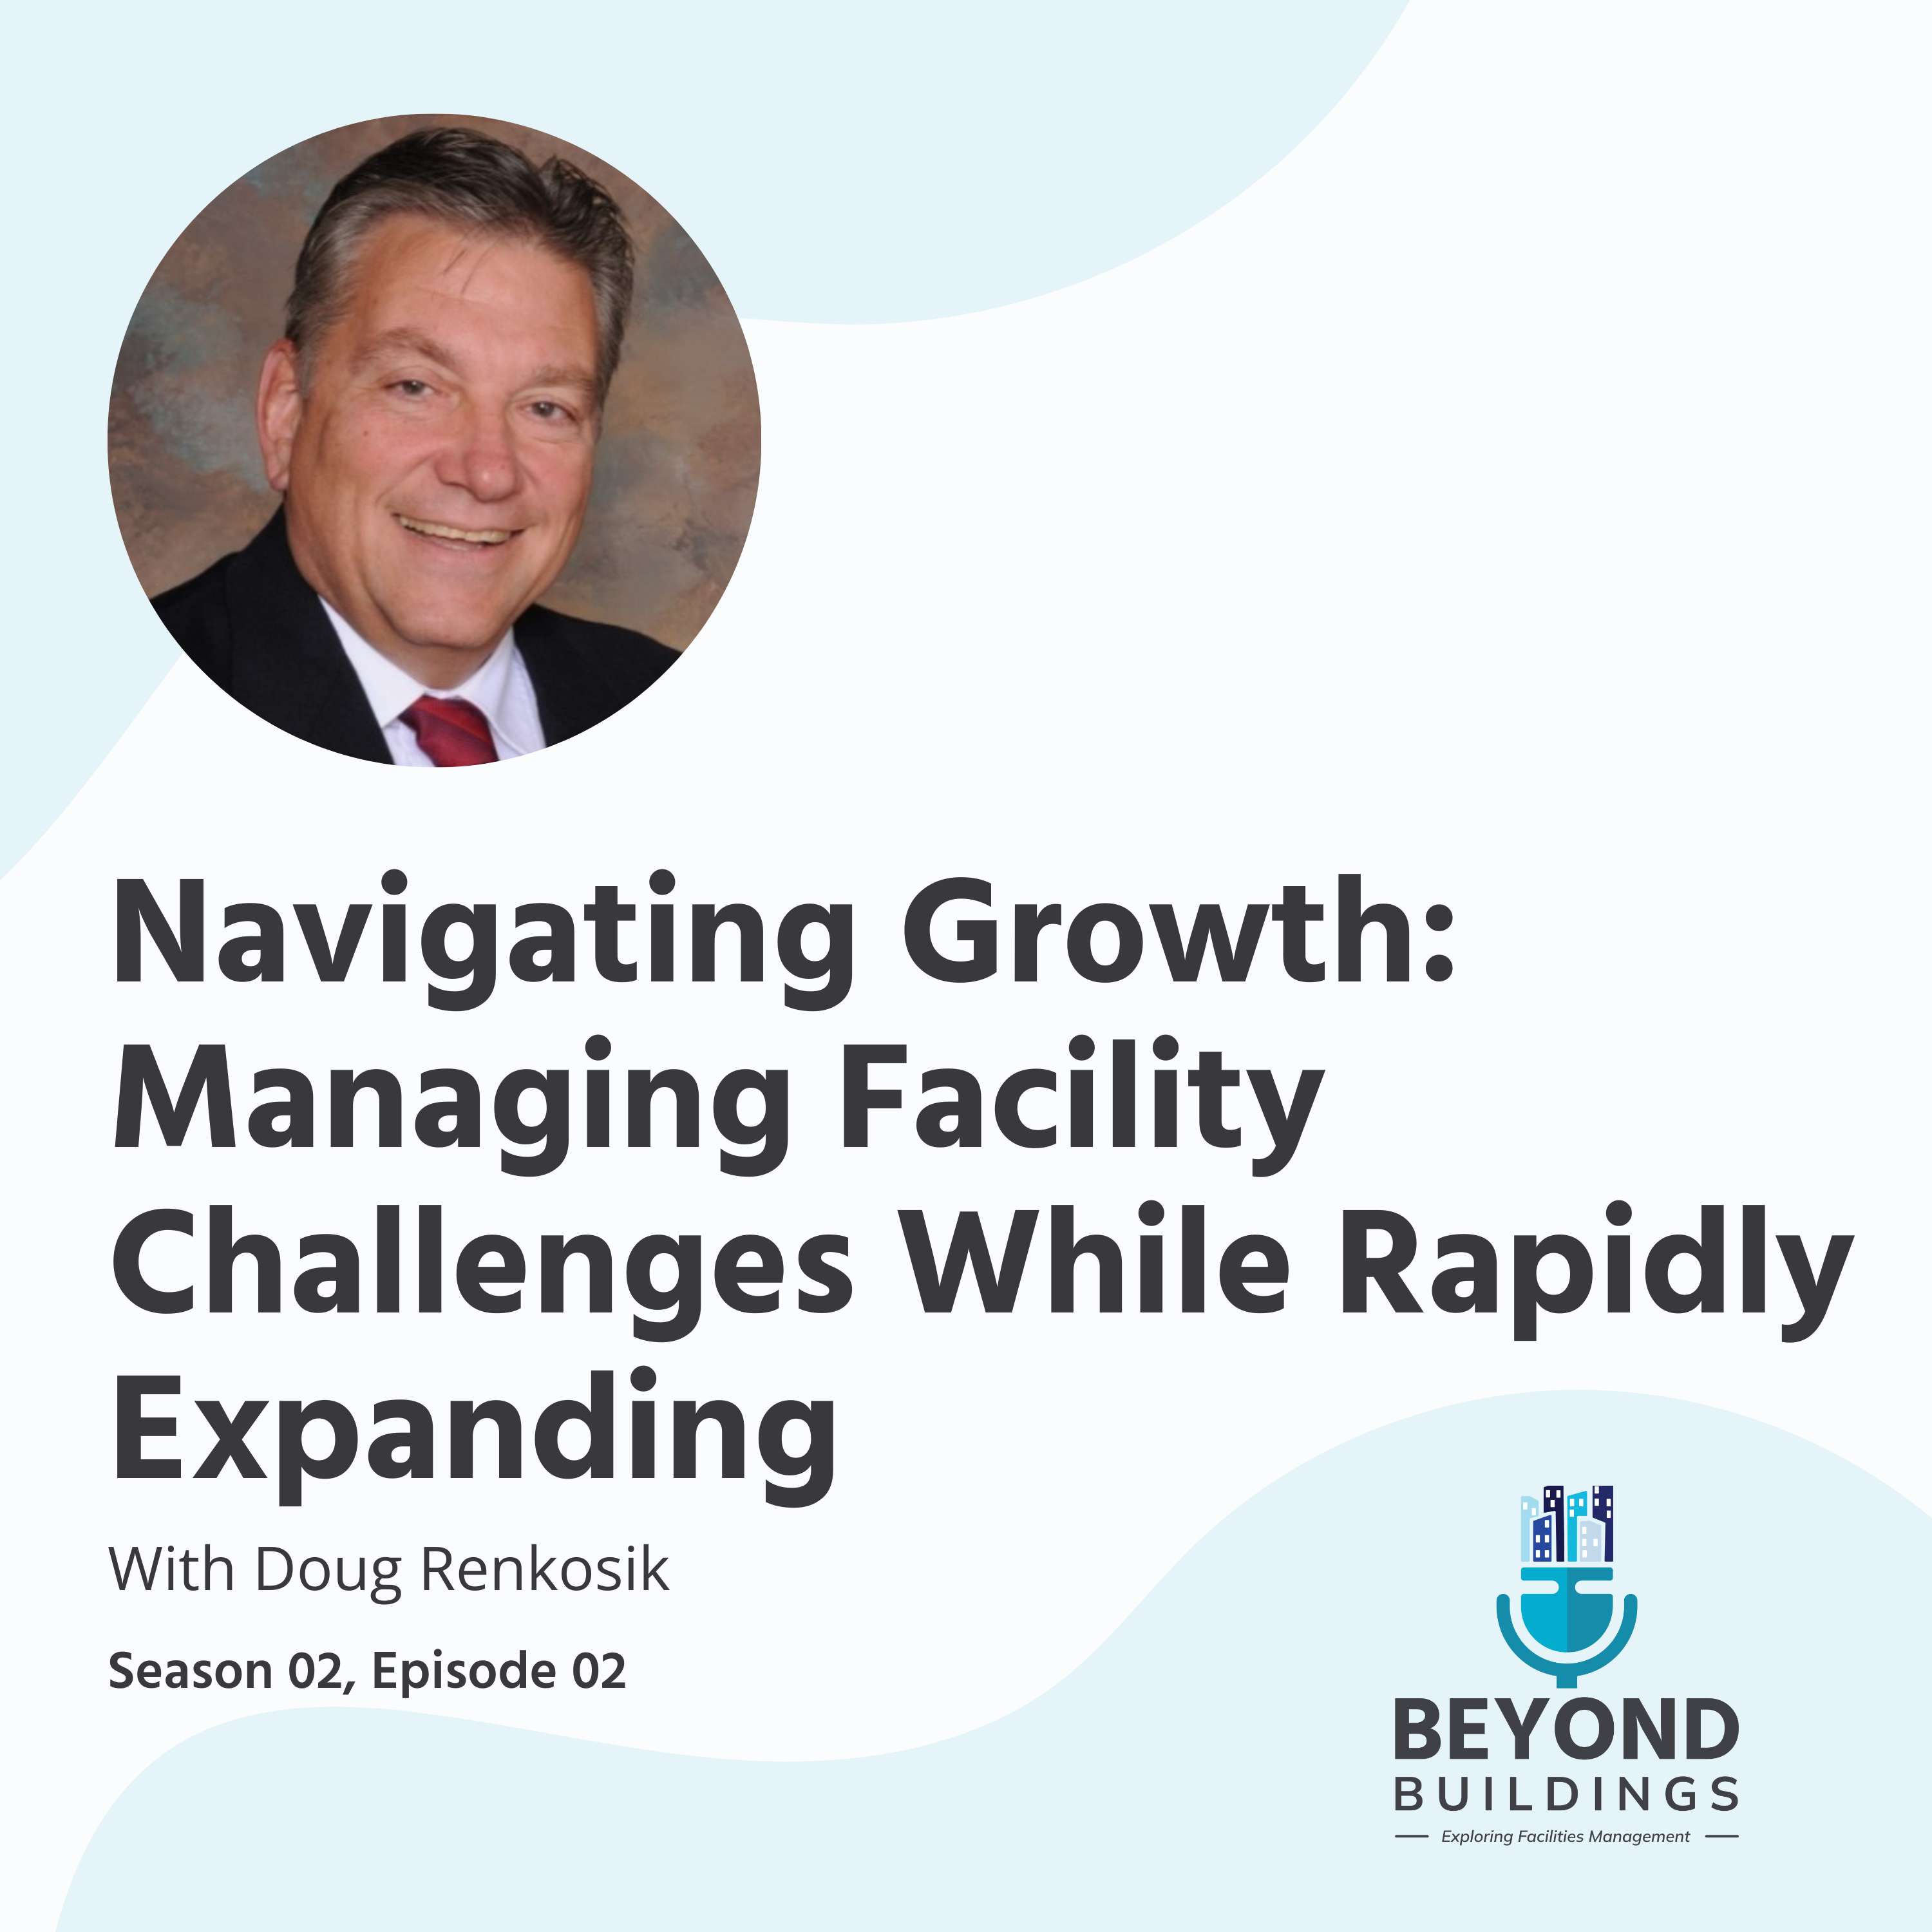 Navigating Growth: Managing Facility Challenges While Rapidly Expanding